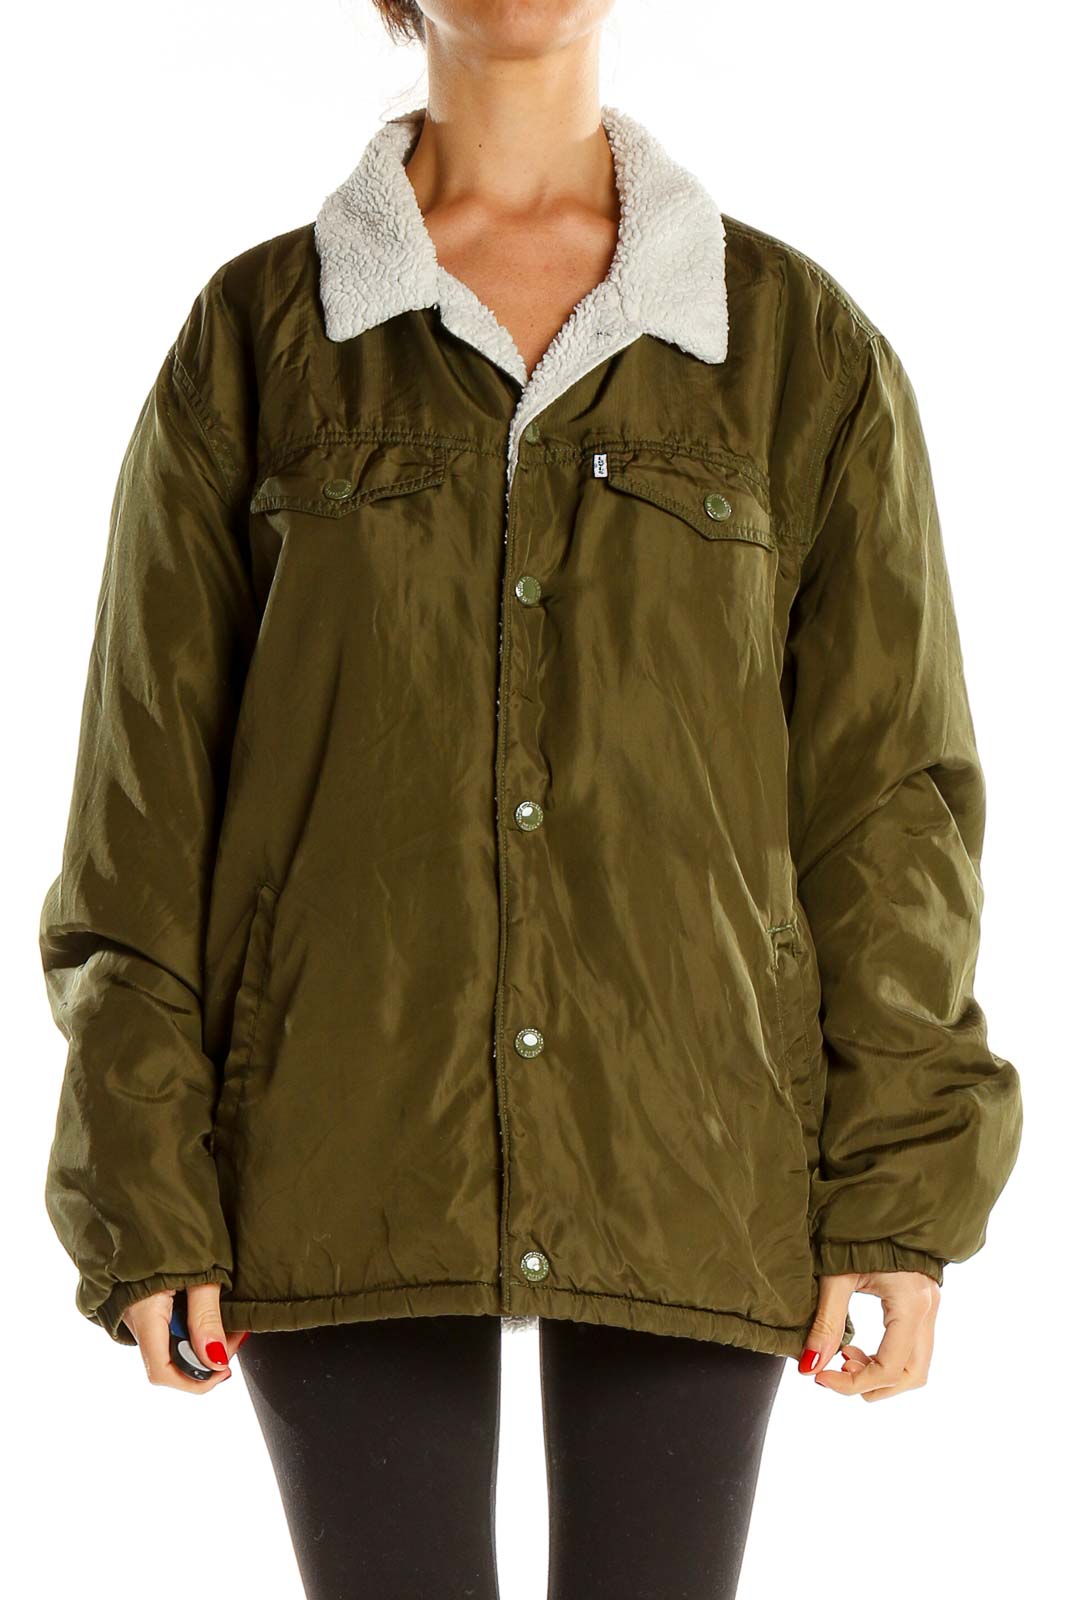 Green Military Jacket With Sherpa Lining Front